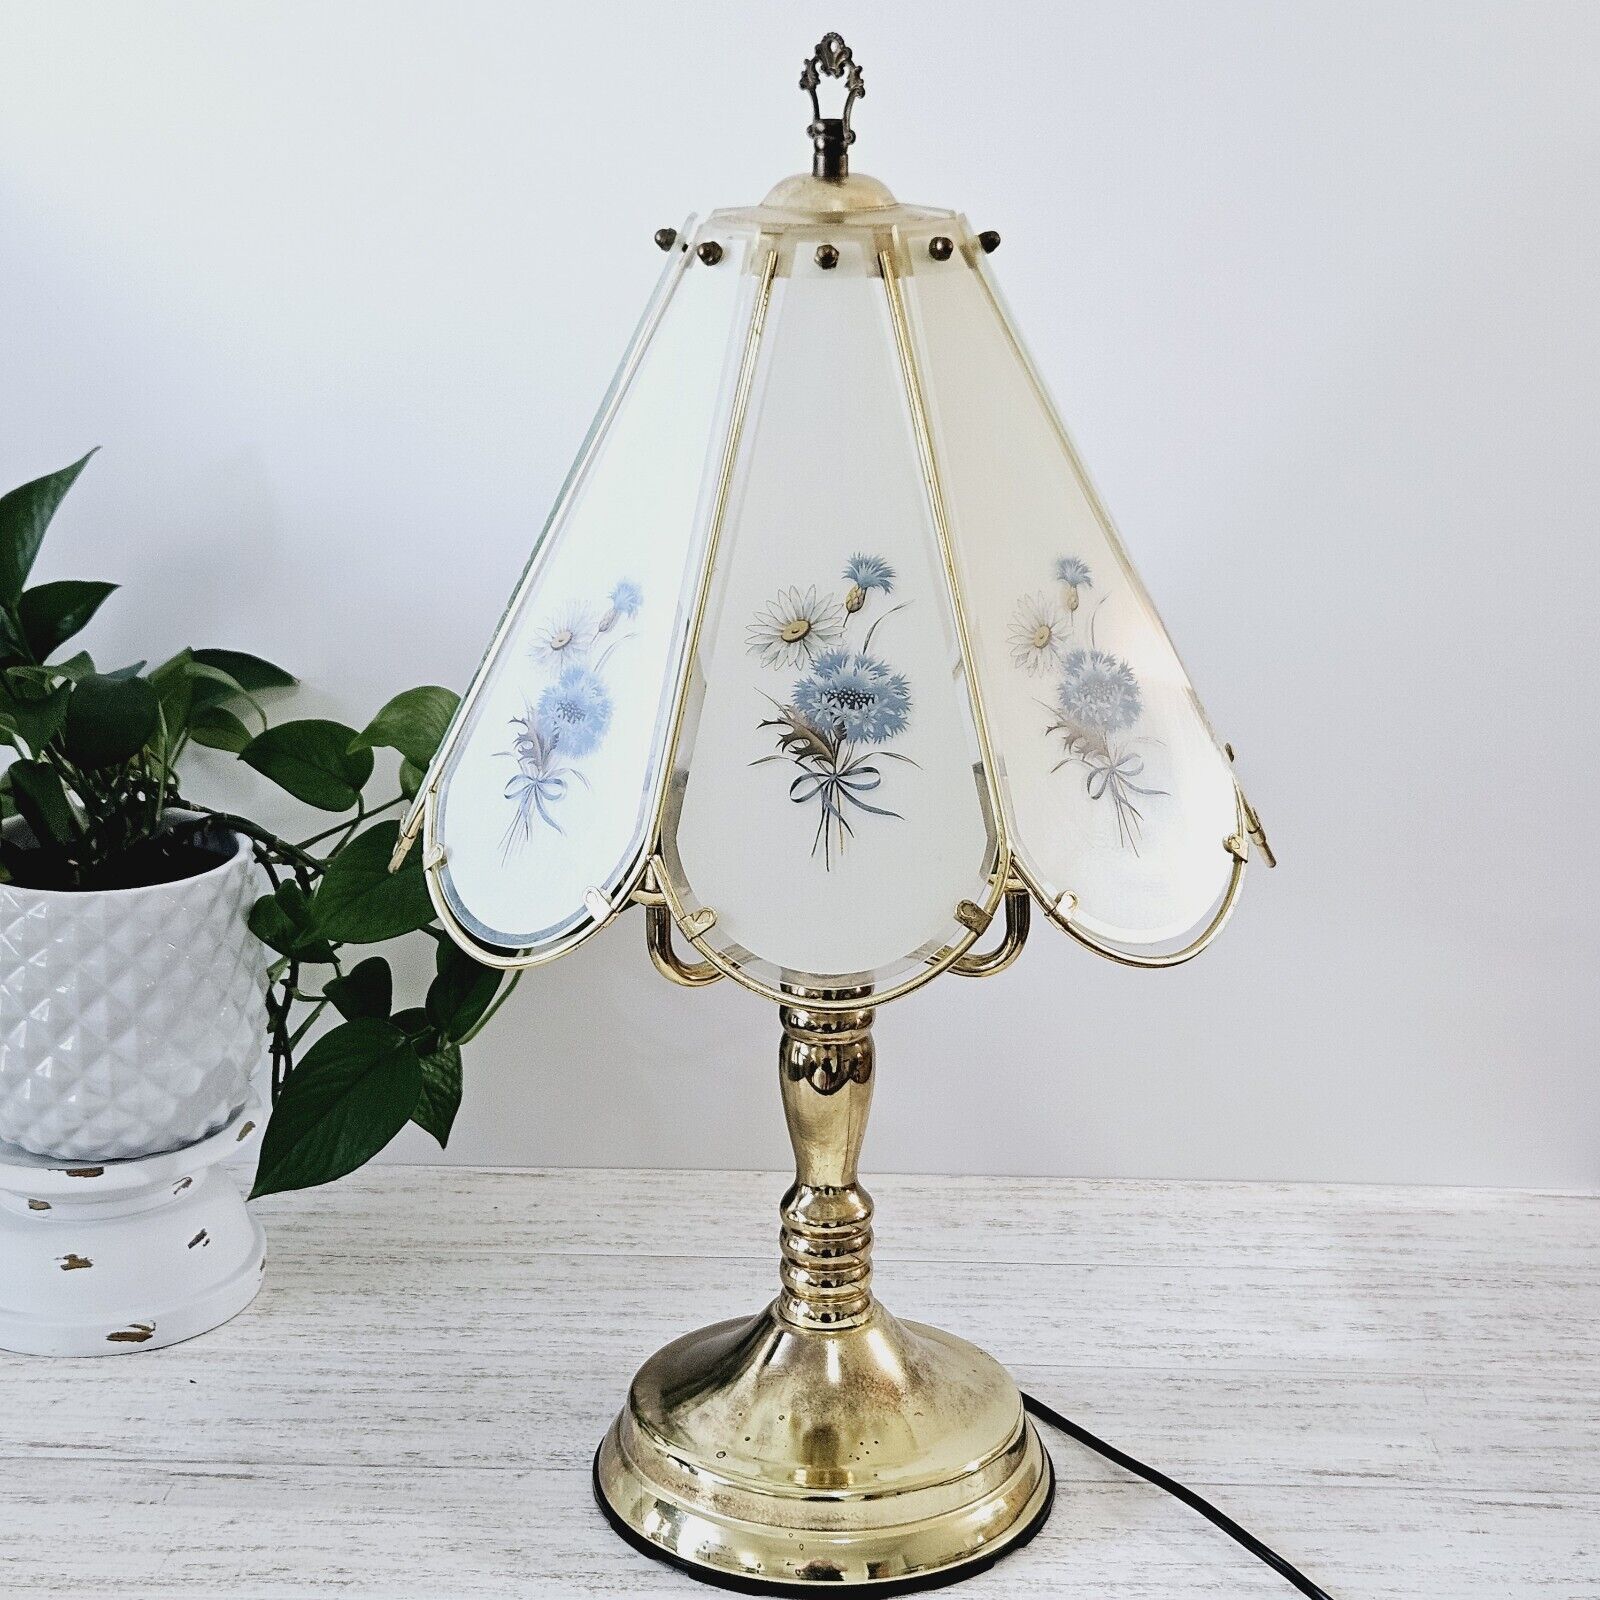 Vintage Touch lamp 3 Way with Blue Floral design 8 Panel Glass